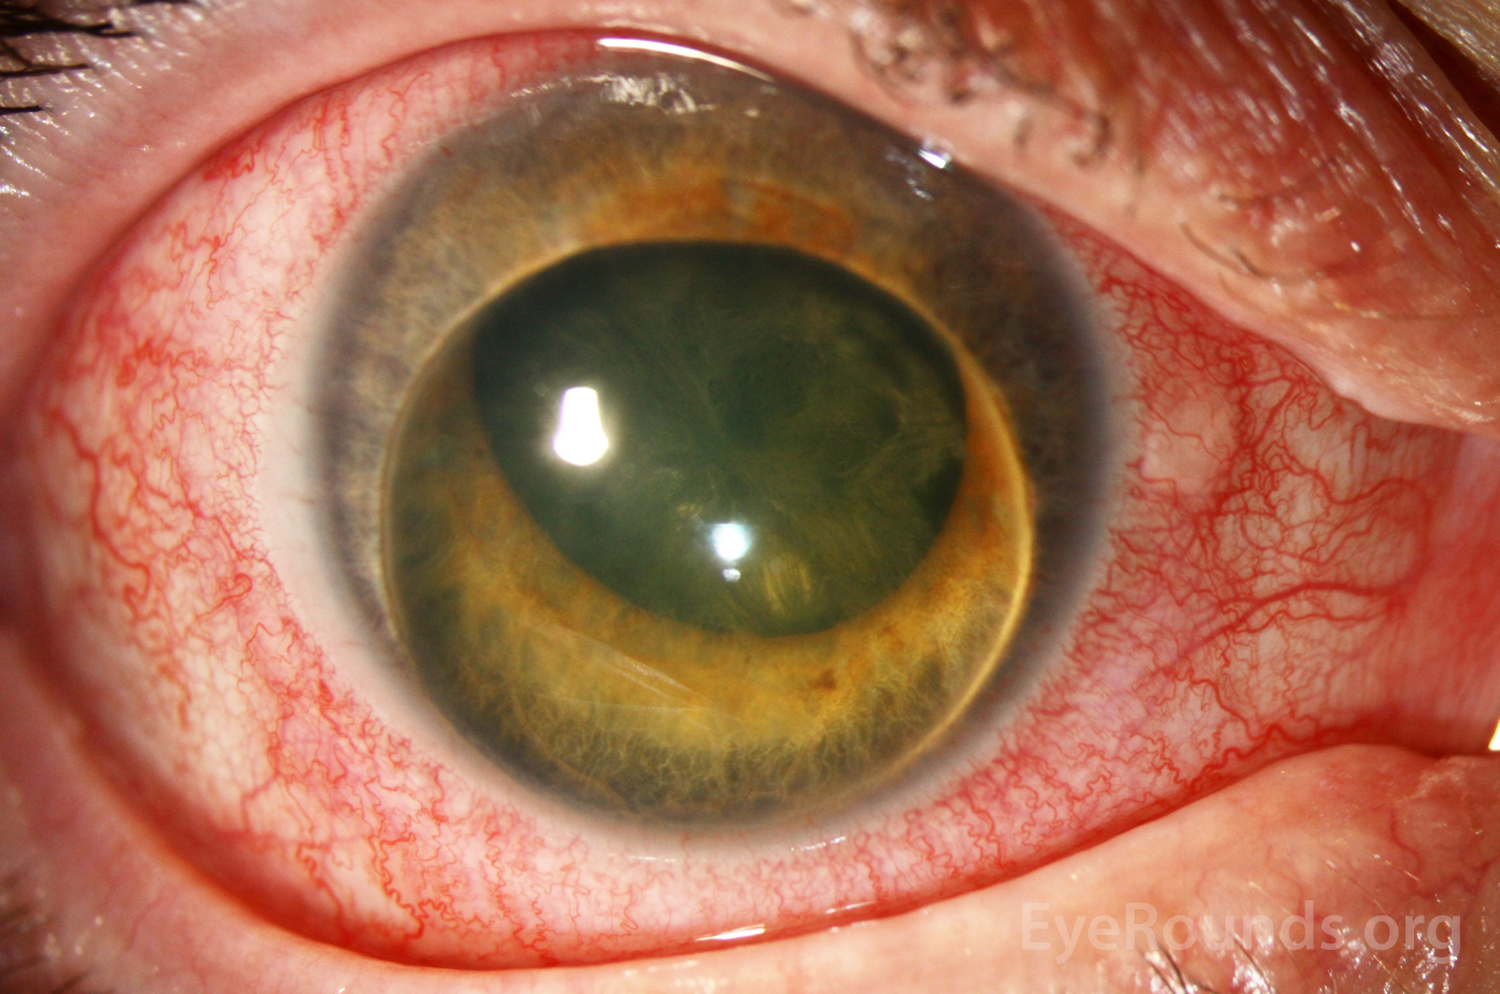 slit lamp photo of the right eye